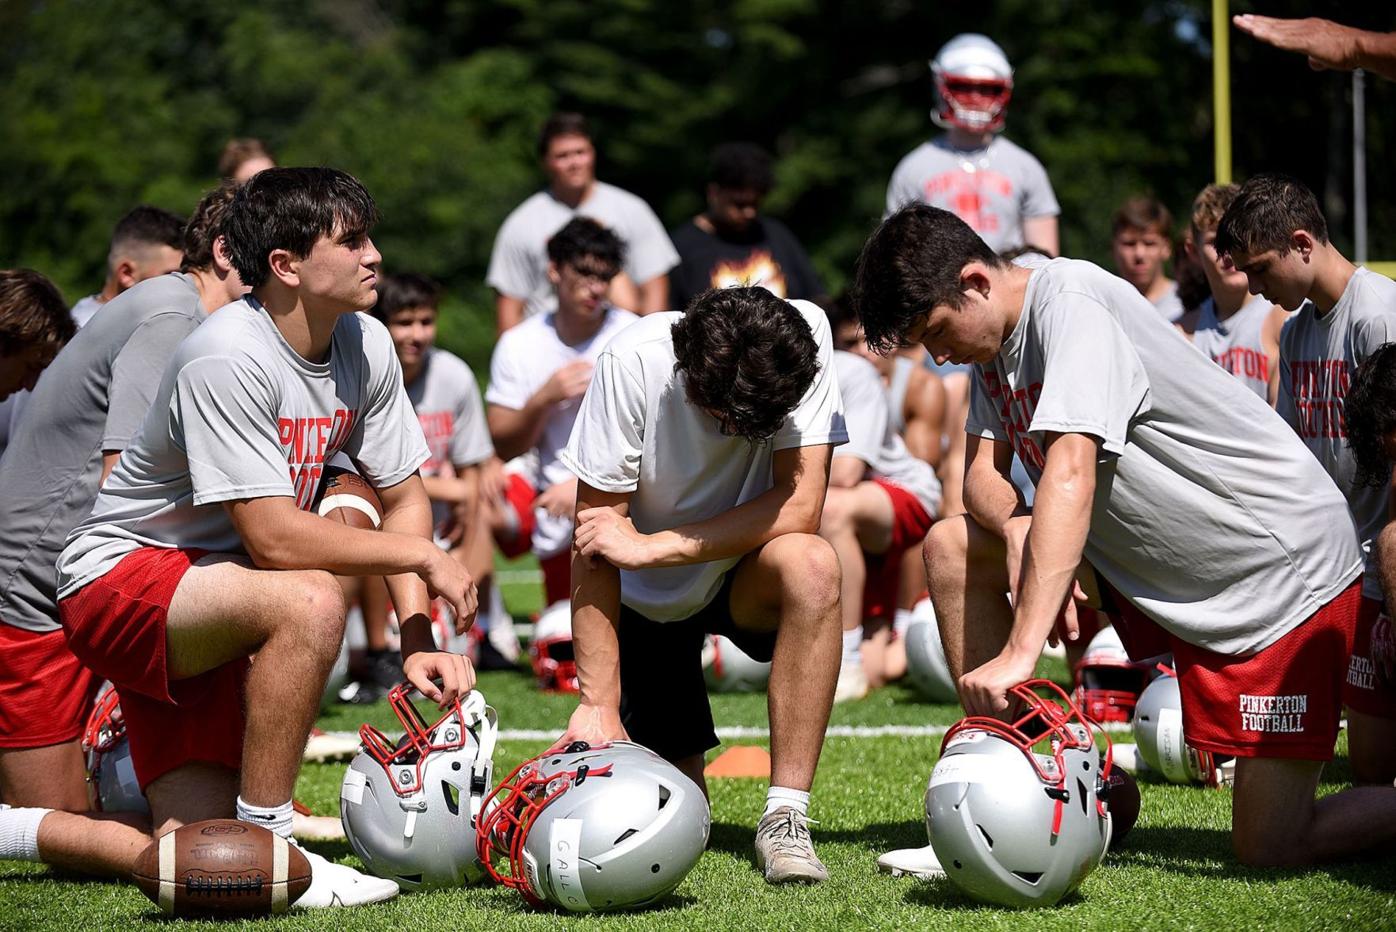 Pinkerton football is back High School Sports / Youth